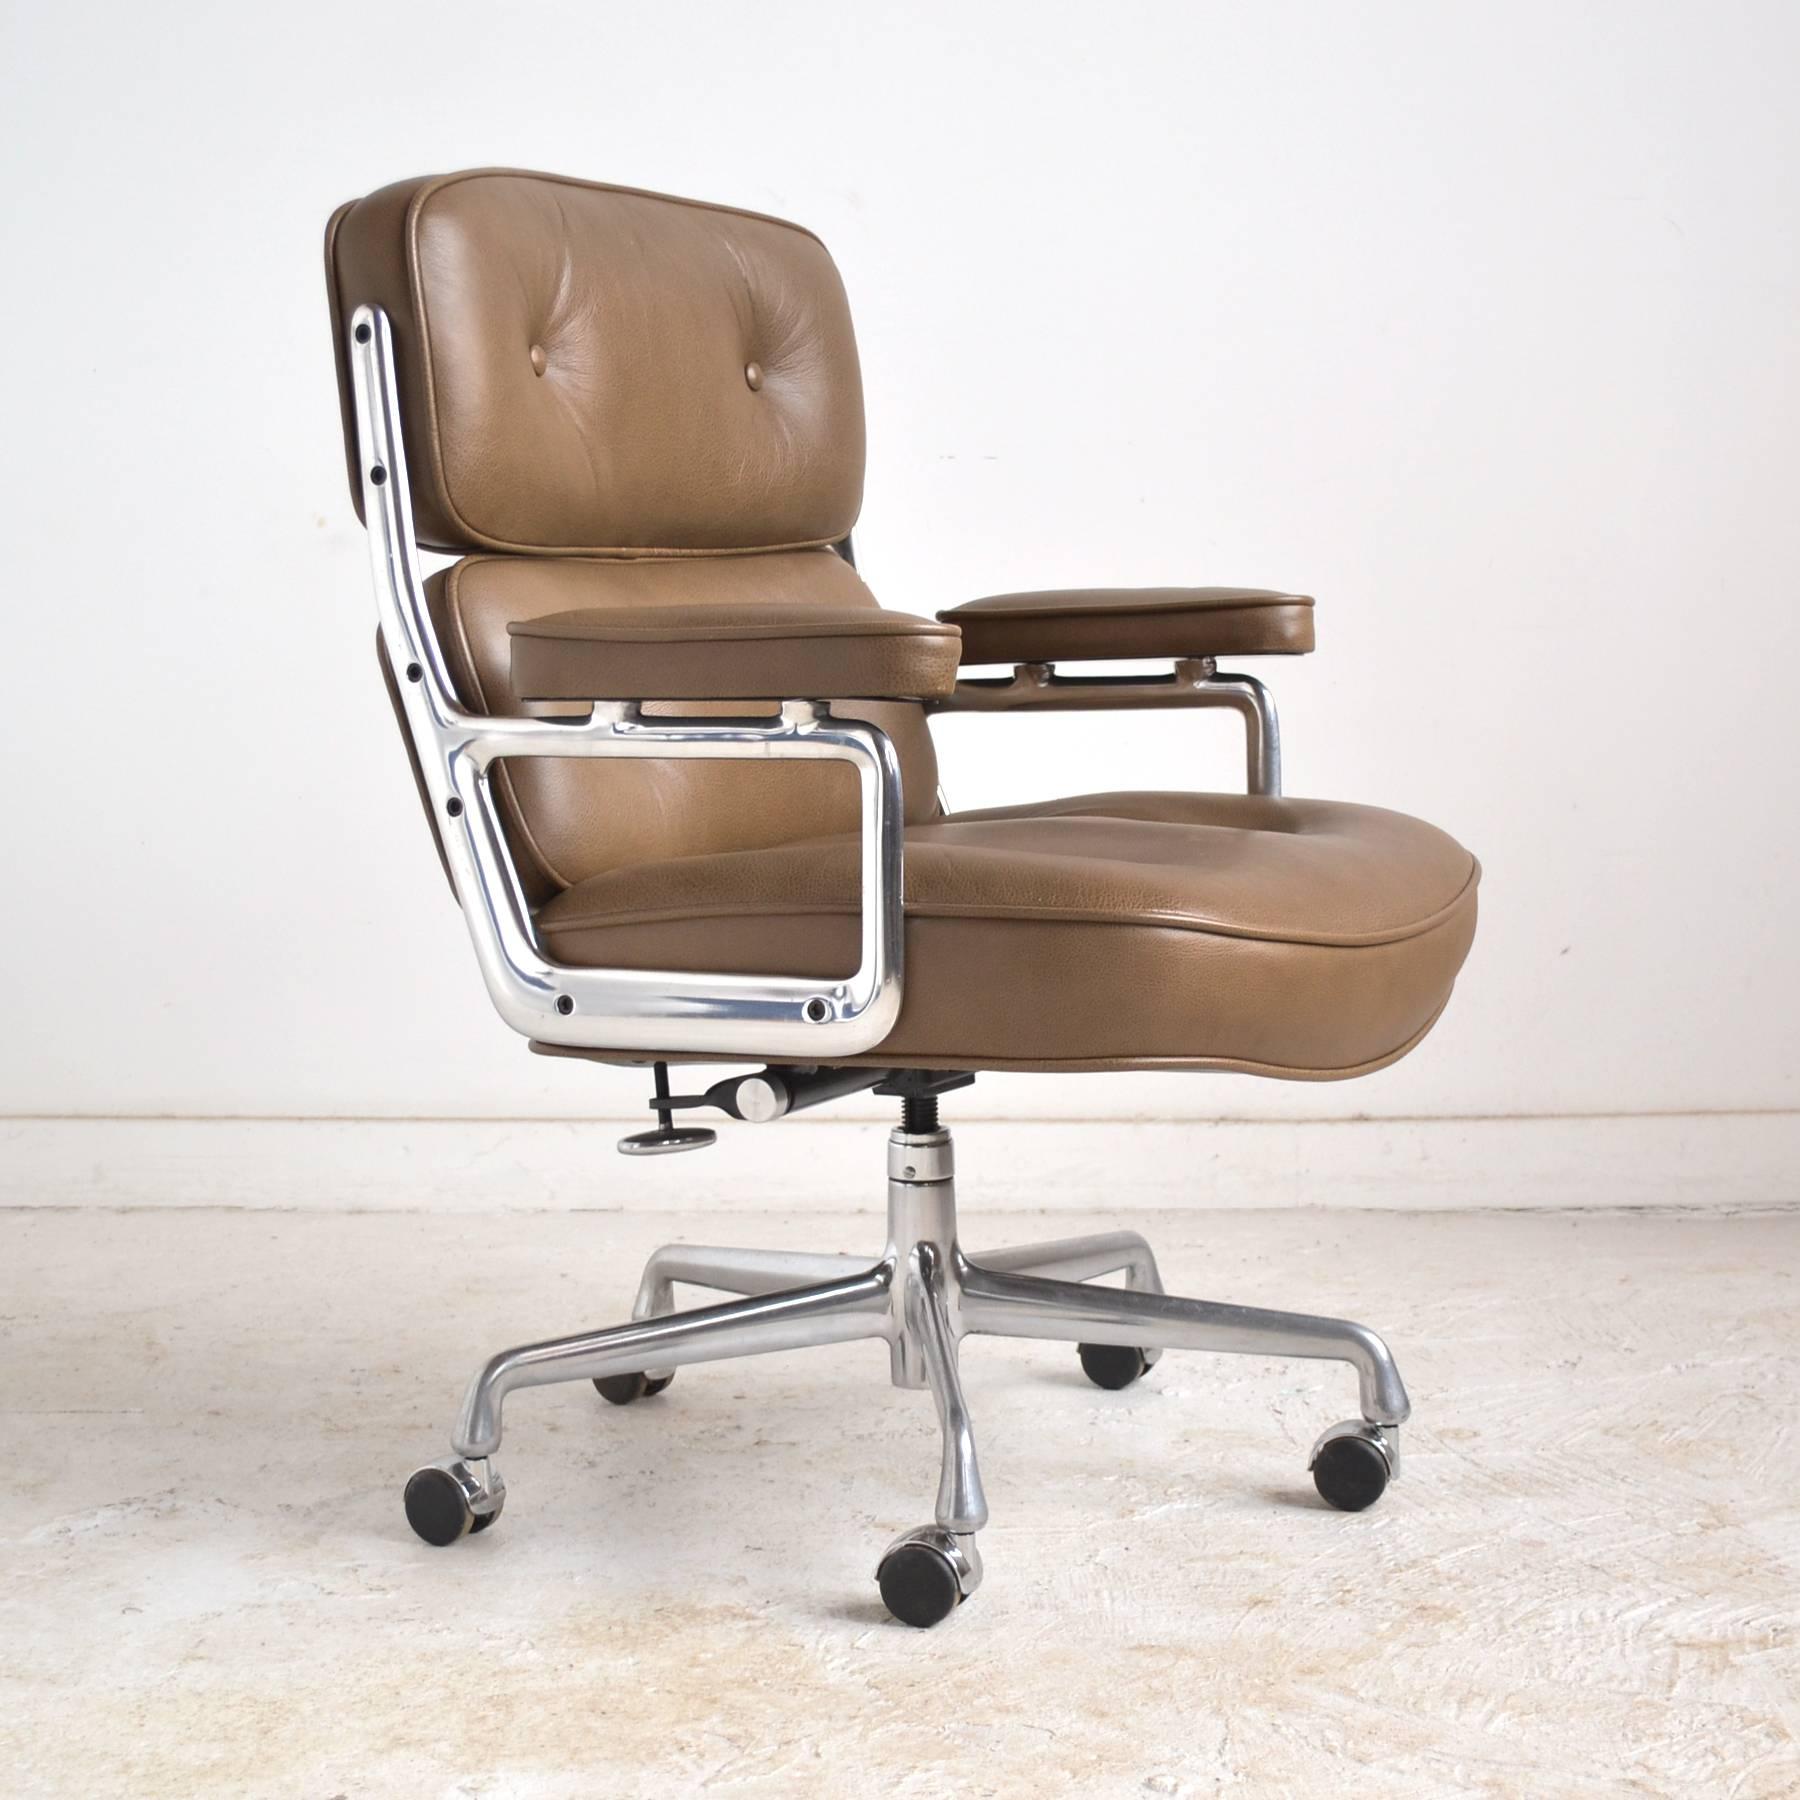 Originally designed for the Time-Life building in 1960, this chair shares qualities with other Eames designs. The generous proportions and deep luxurious cushions offer the sitter great comfort and the cast aluminum frame is light and stylish.
The